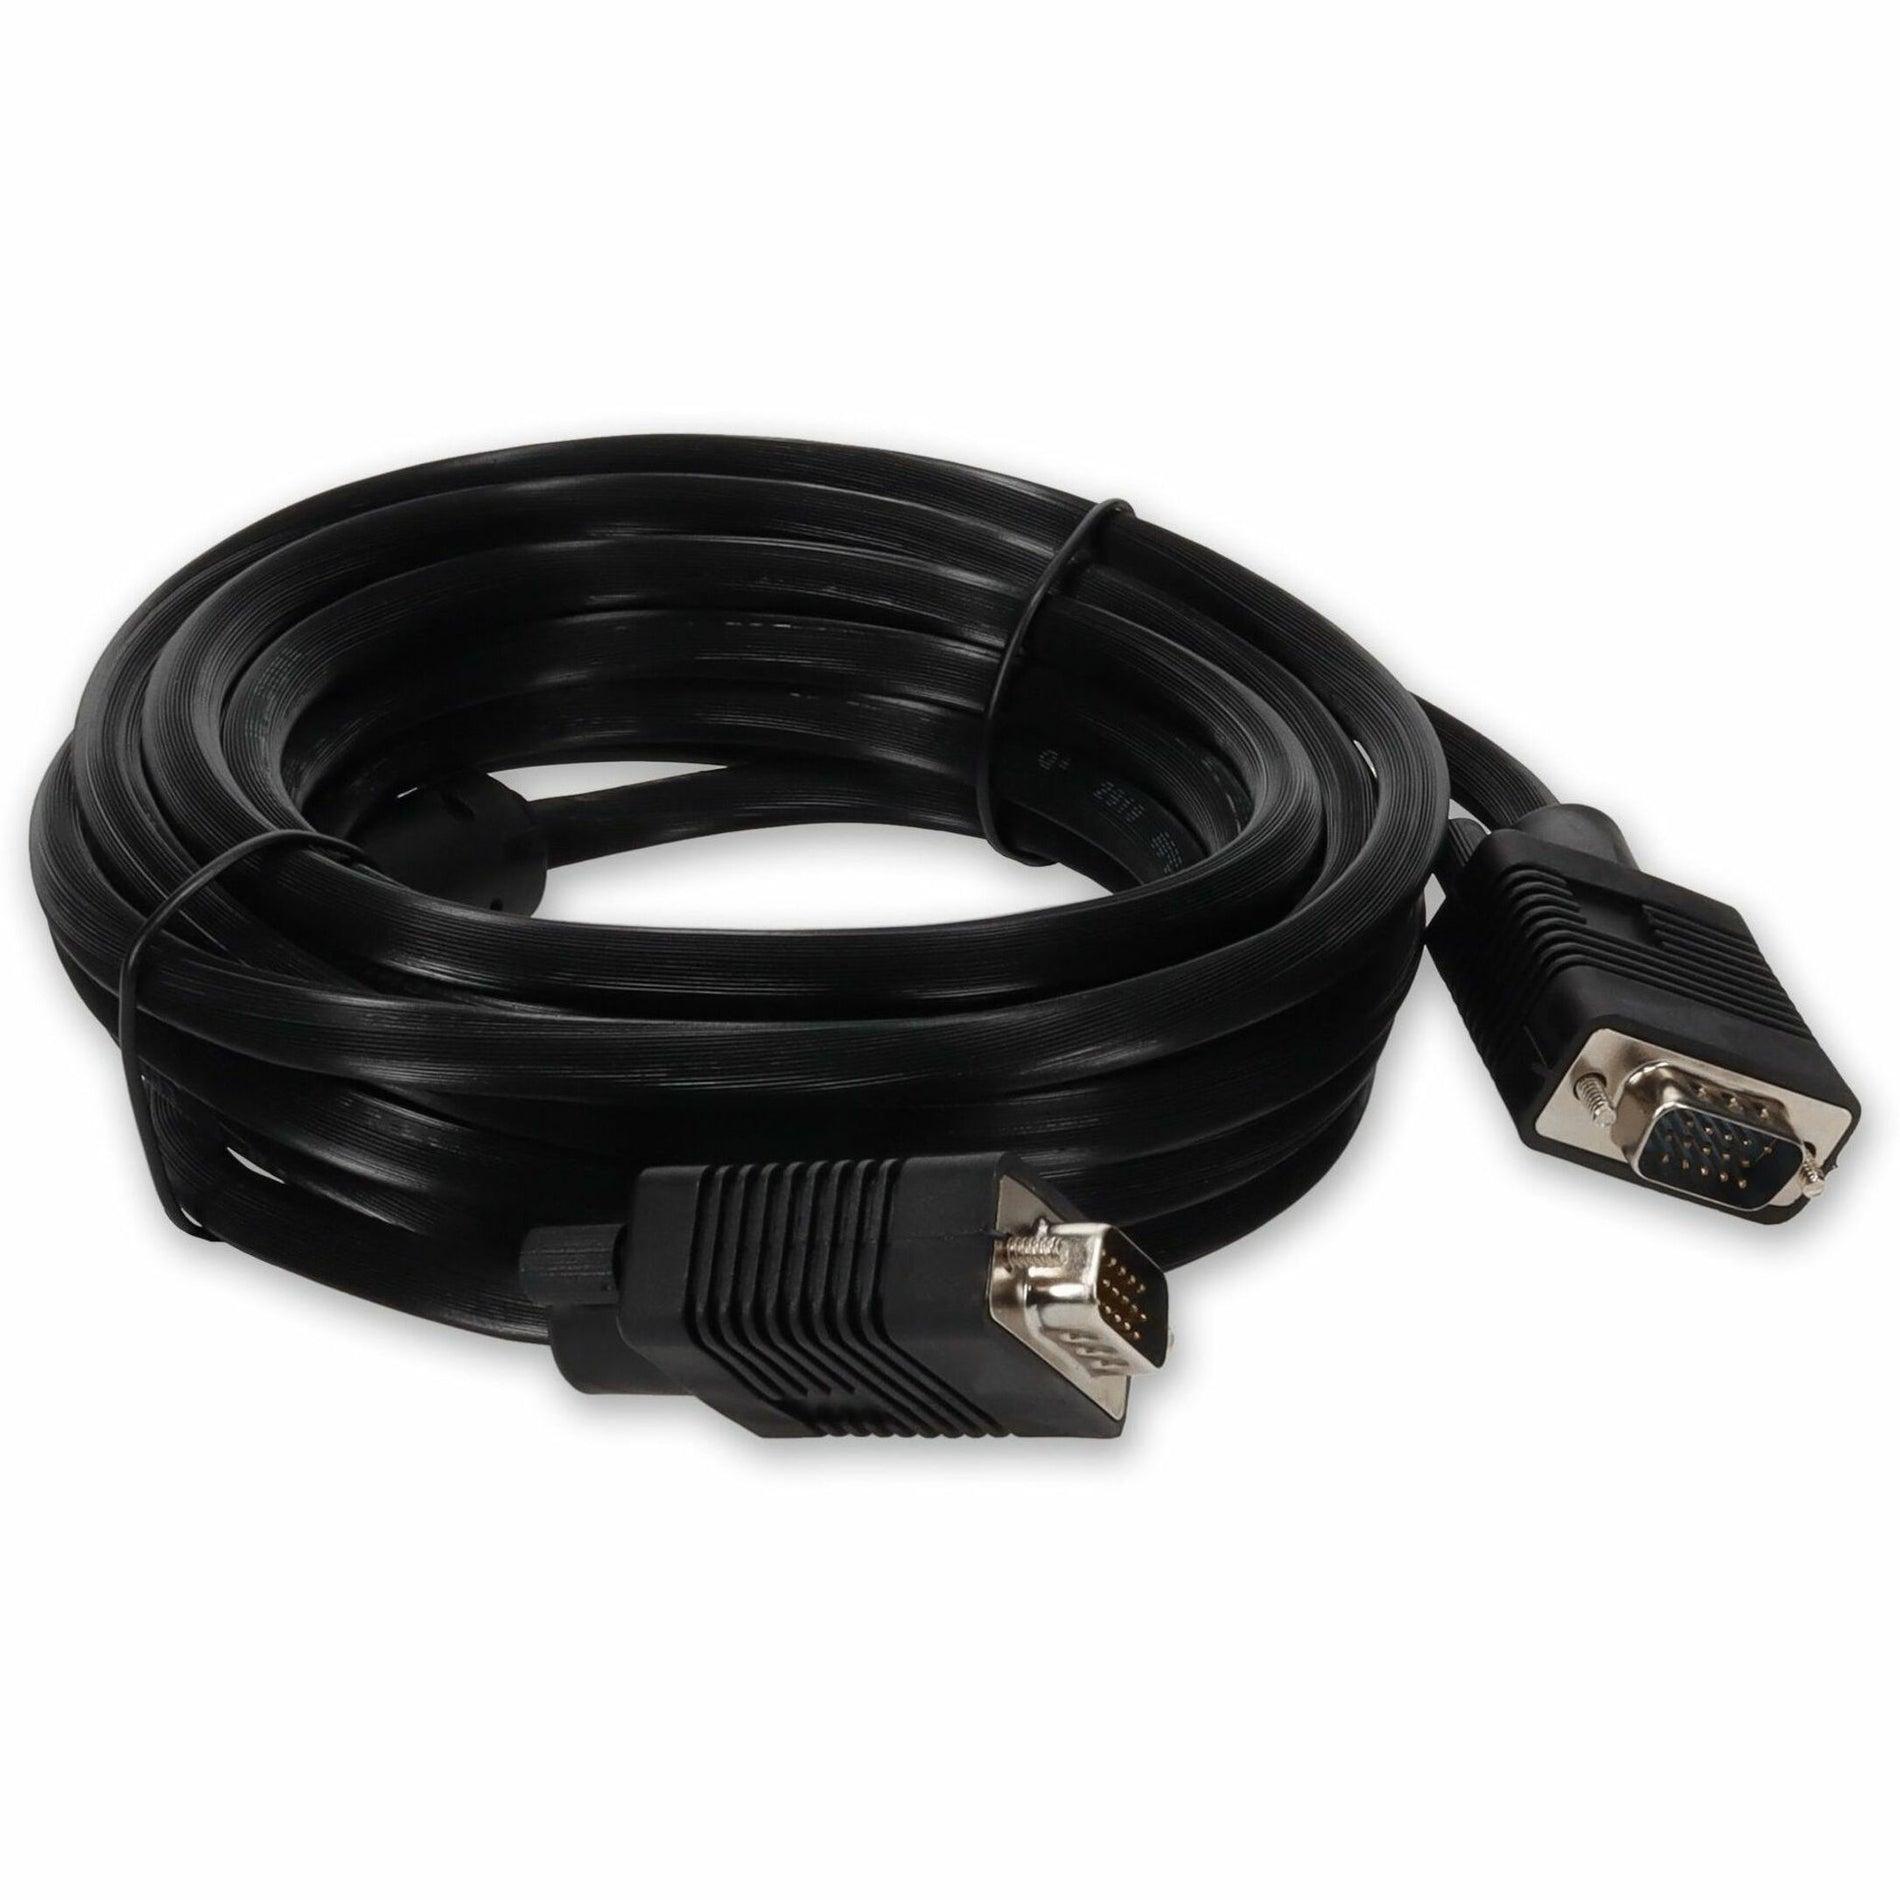 AddOn VGAMM25 25ft (7.6M) VGA High Resolution Monitor Cable - Male to Male, 3 Year Warranty, United States